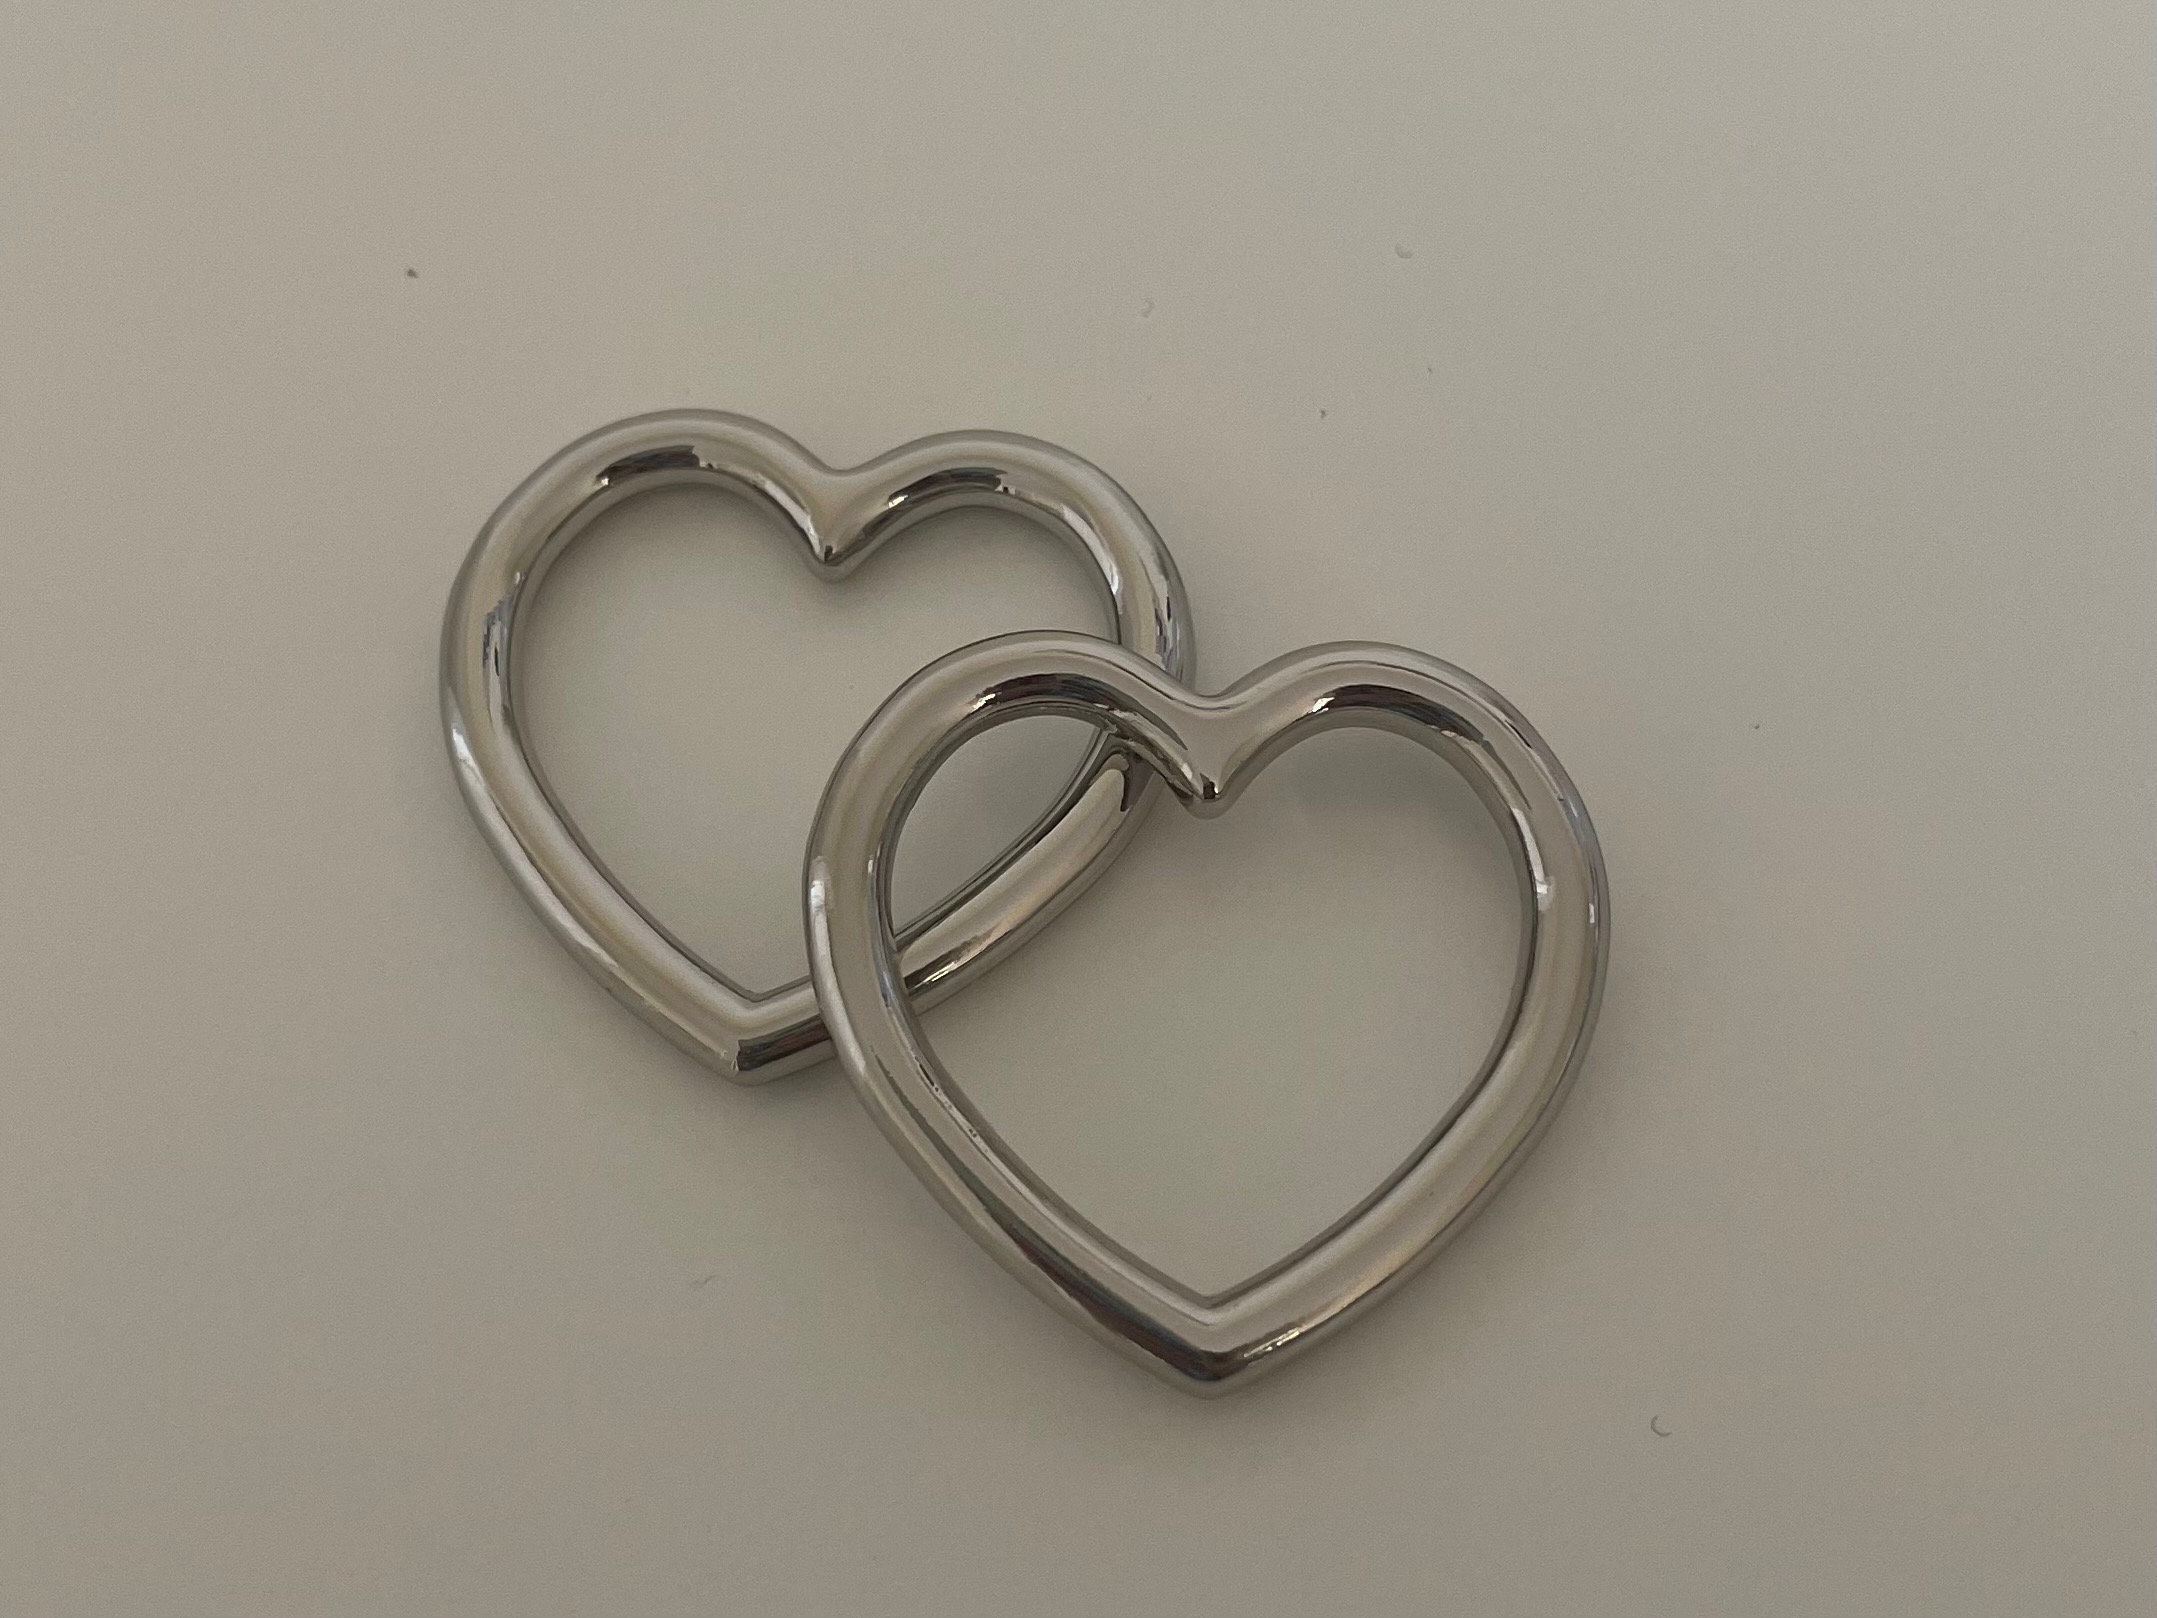 Heart-Shaped Vintage-Style Metal Clasp, 1 7/8 Long